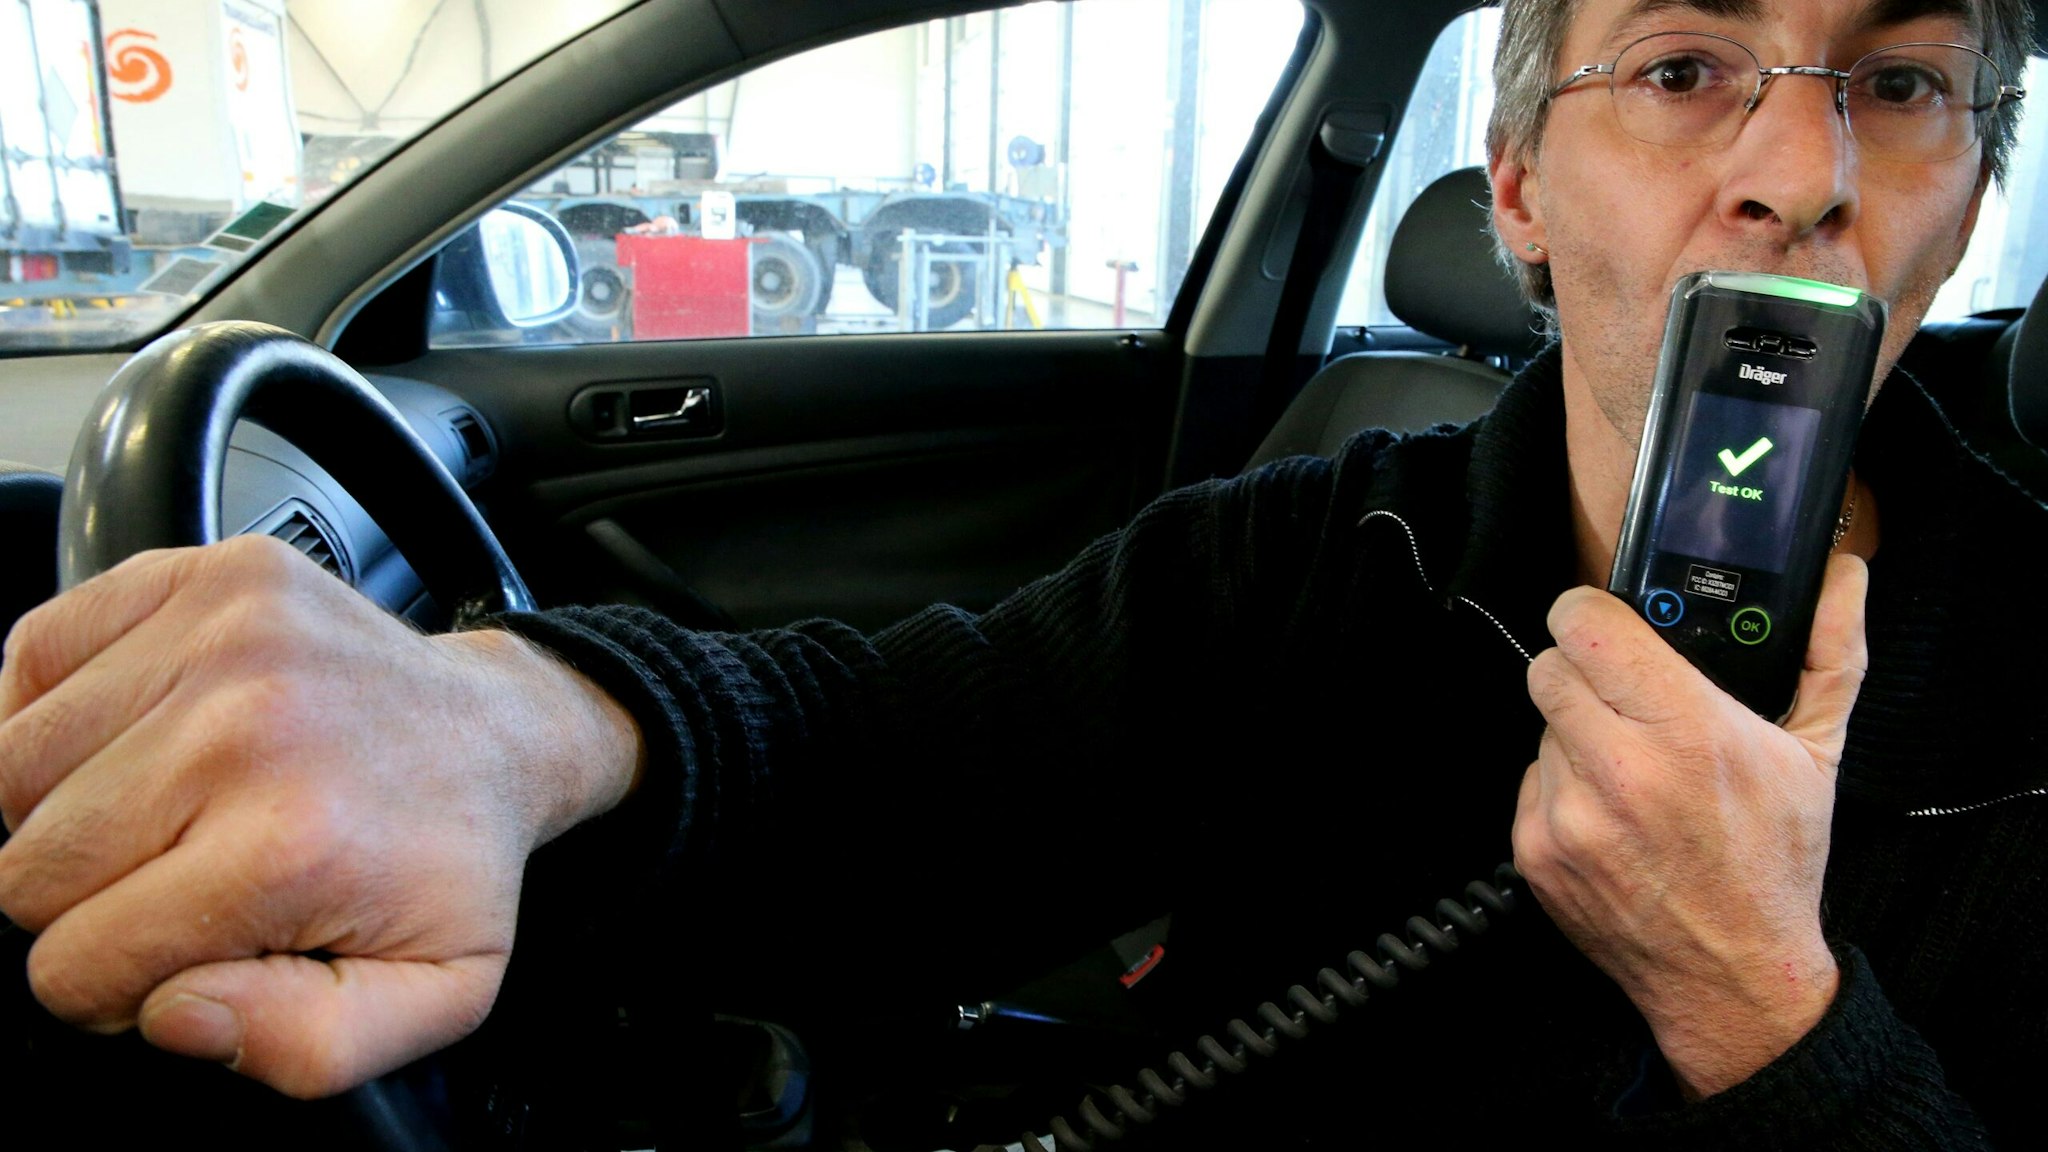 A man holds an electronic ethylotest device that prevents the start of the vehicle in case of positive control, in Reims, northeastern France, on December 1, 2016. This device is tested in several French departments from December 1 and will be mandatory for people in case of a positive test. The lettering on the display reads 'Test ok'. / AFP / François NASCIMBENI